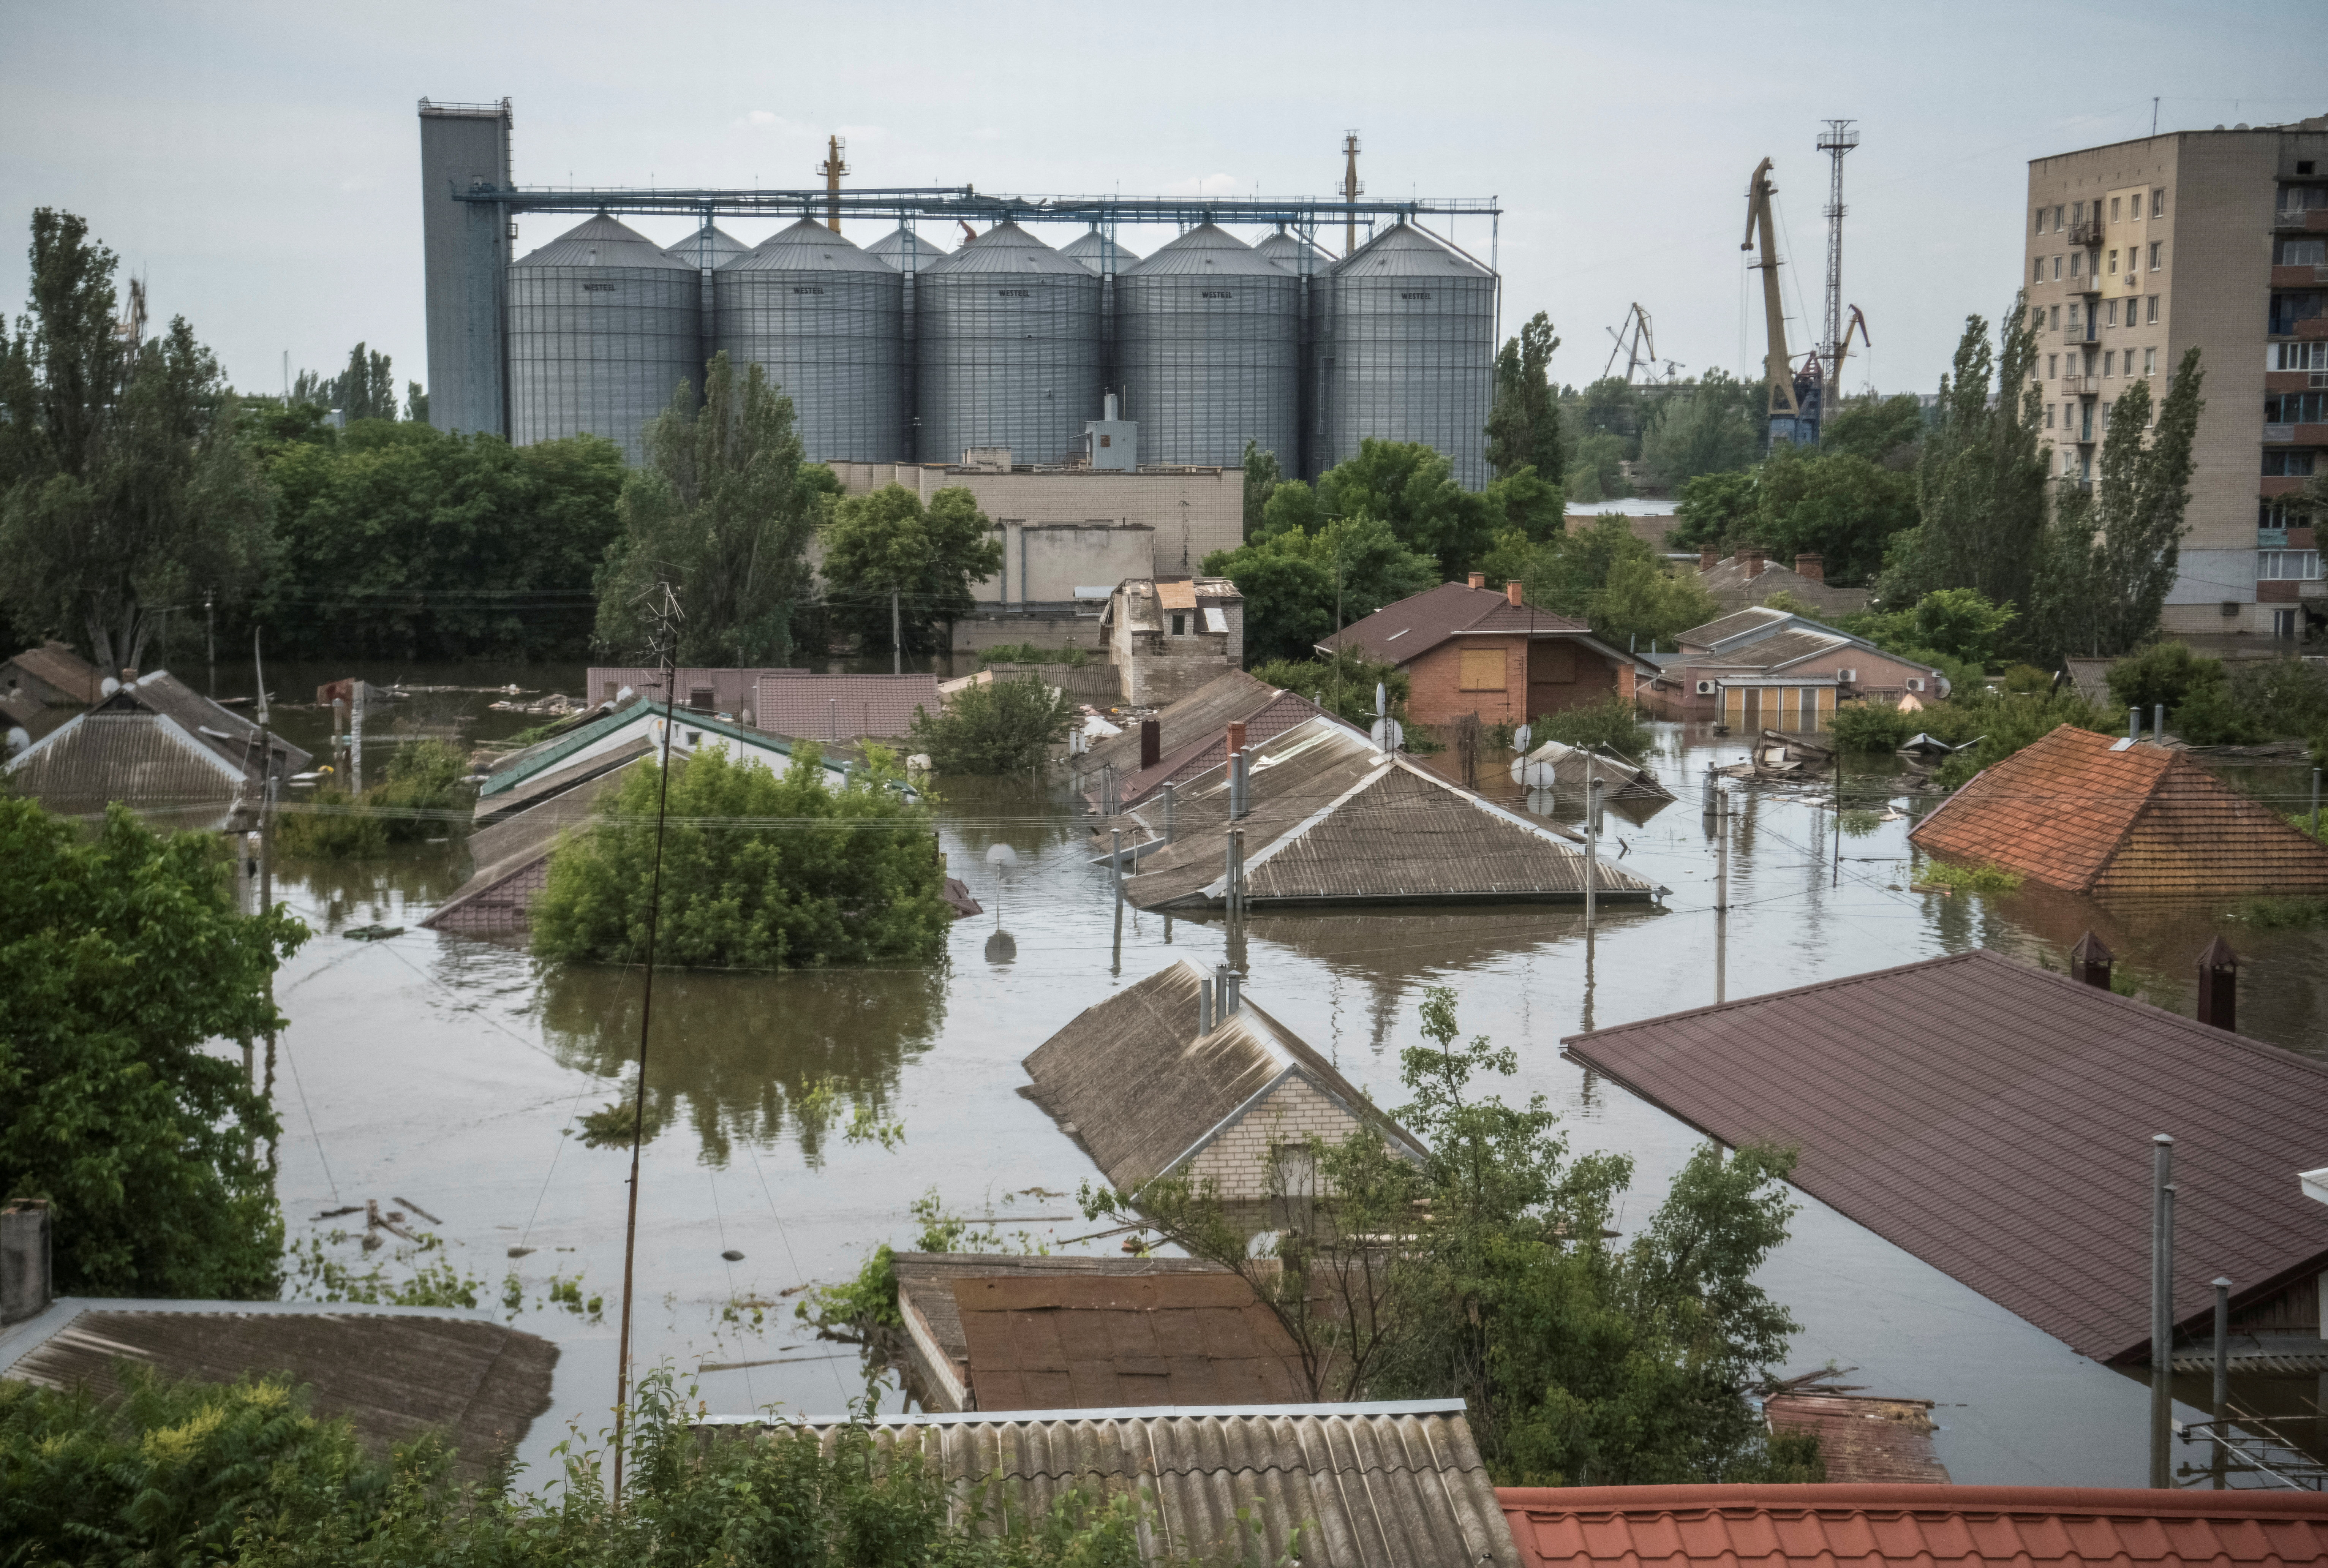 A view shows a flooded area after the Nova Kakhovka dam breached, in Kherson